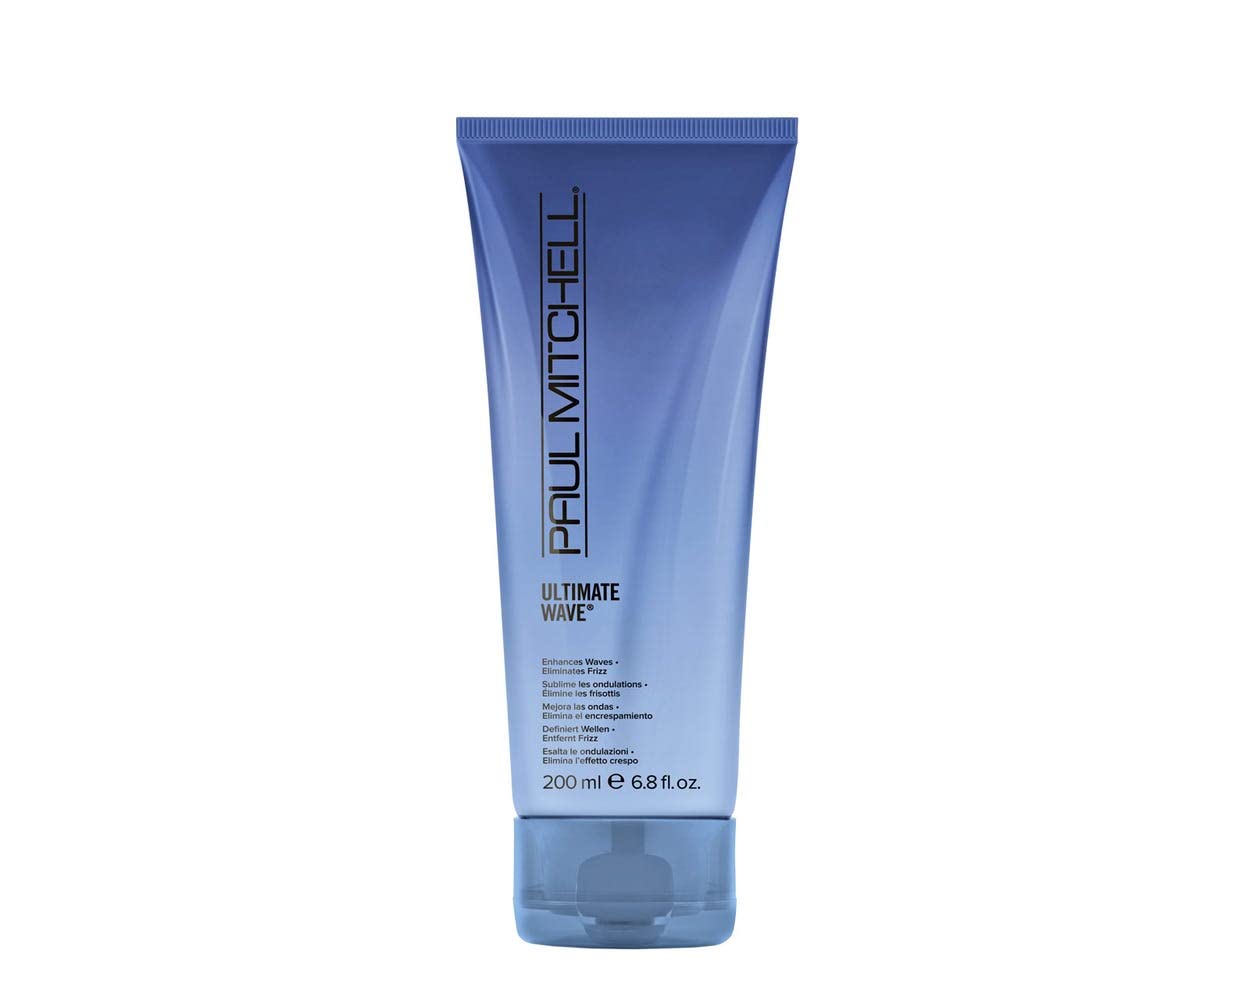 Paul Mitchell Ultimate Wave Lightweight Hair Gel, Enhances Waves, Eliminates Frizz, For Curly Hair, 6.8 fl. oz.